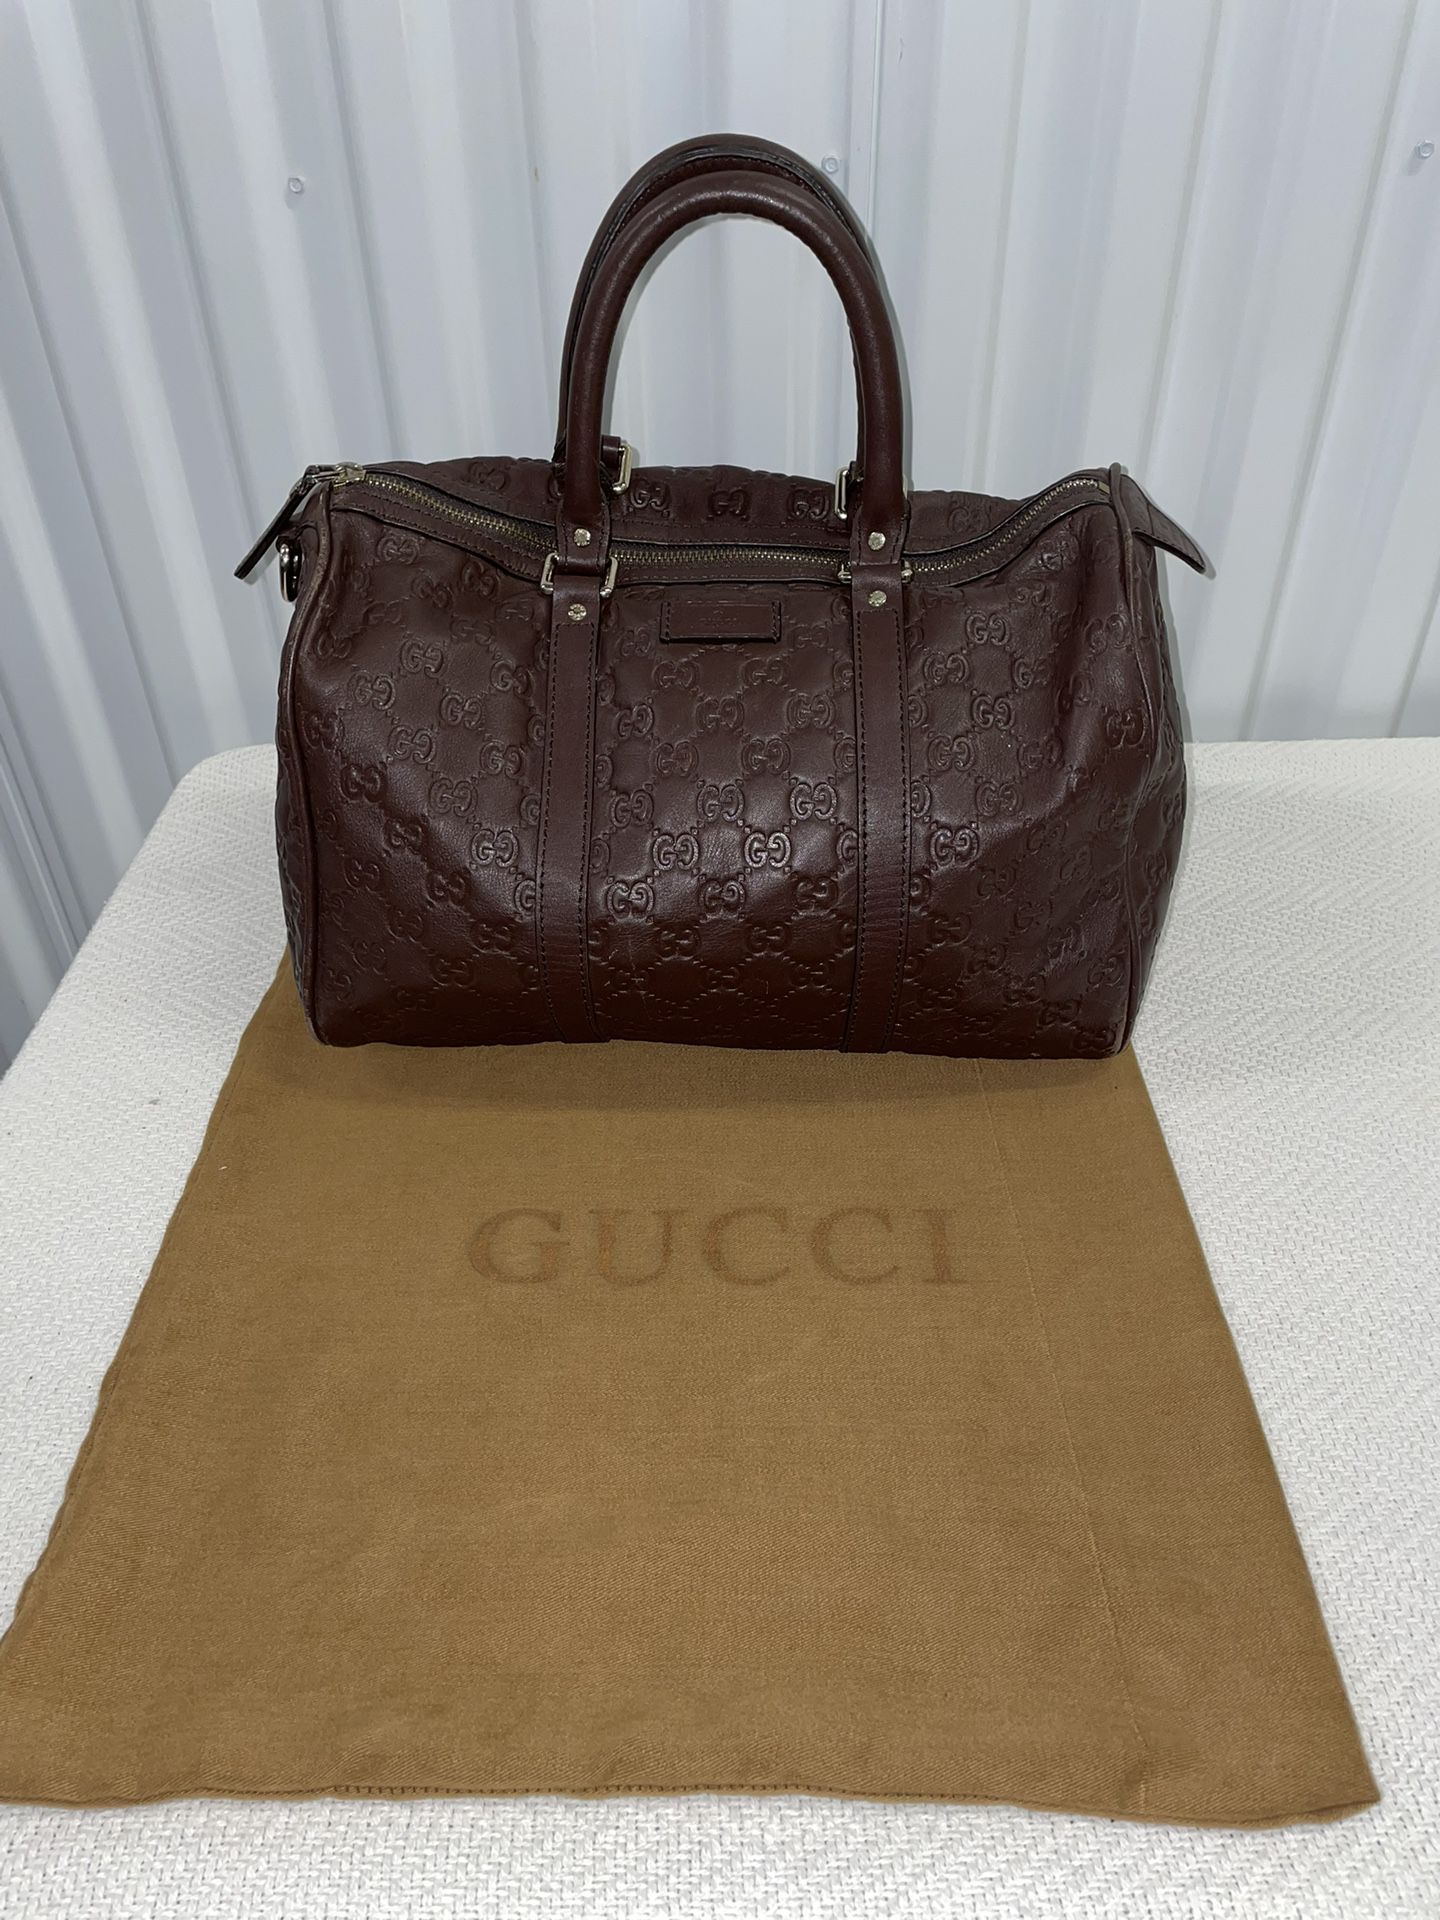 Gucci Purse/Bag Maroon Leather W/ Duster Drawstring Clothe! Clean! 